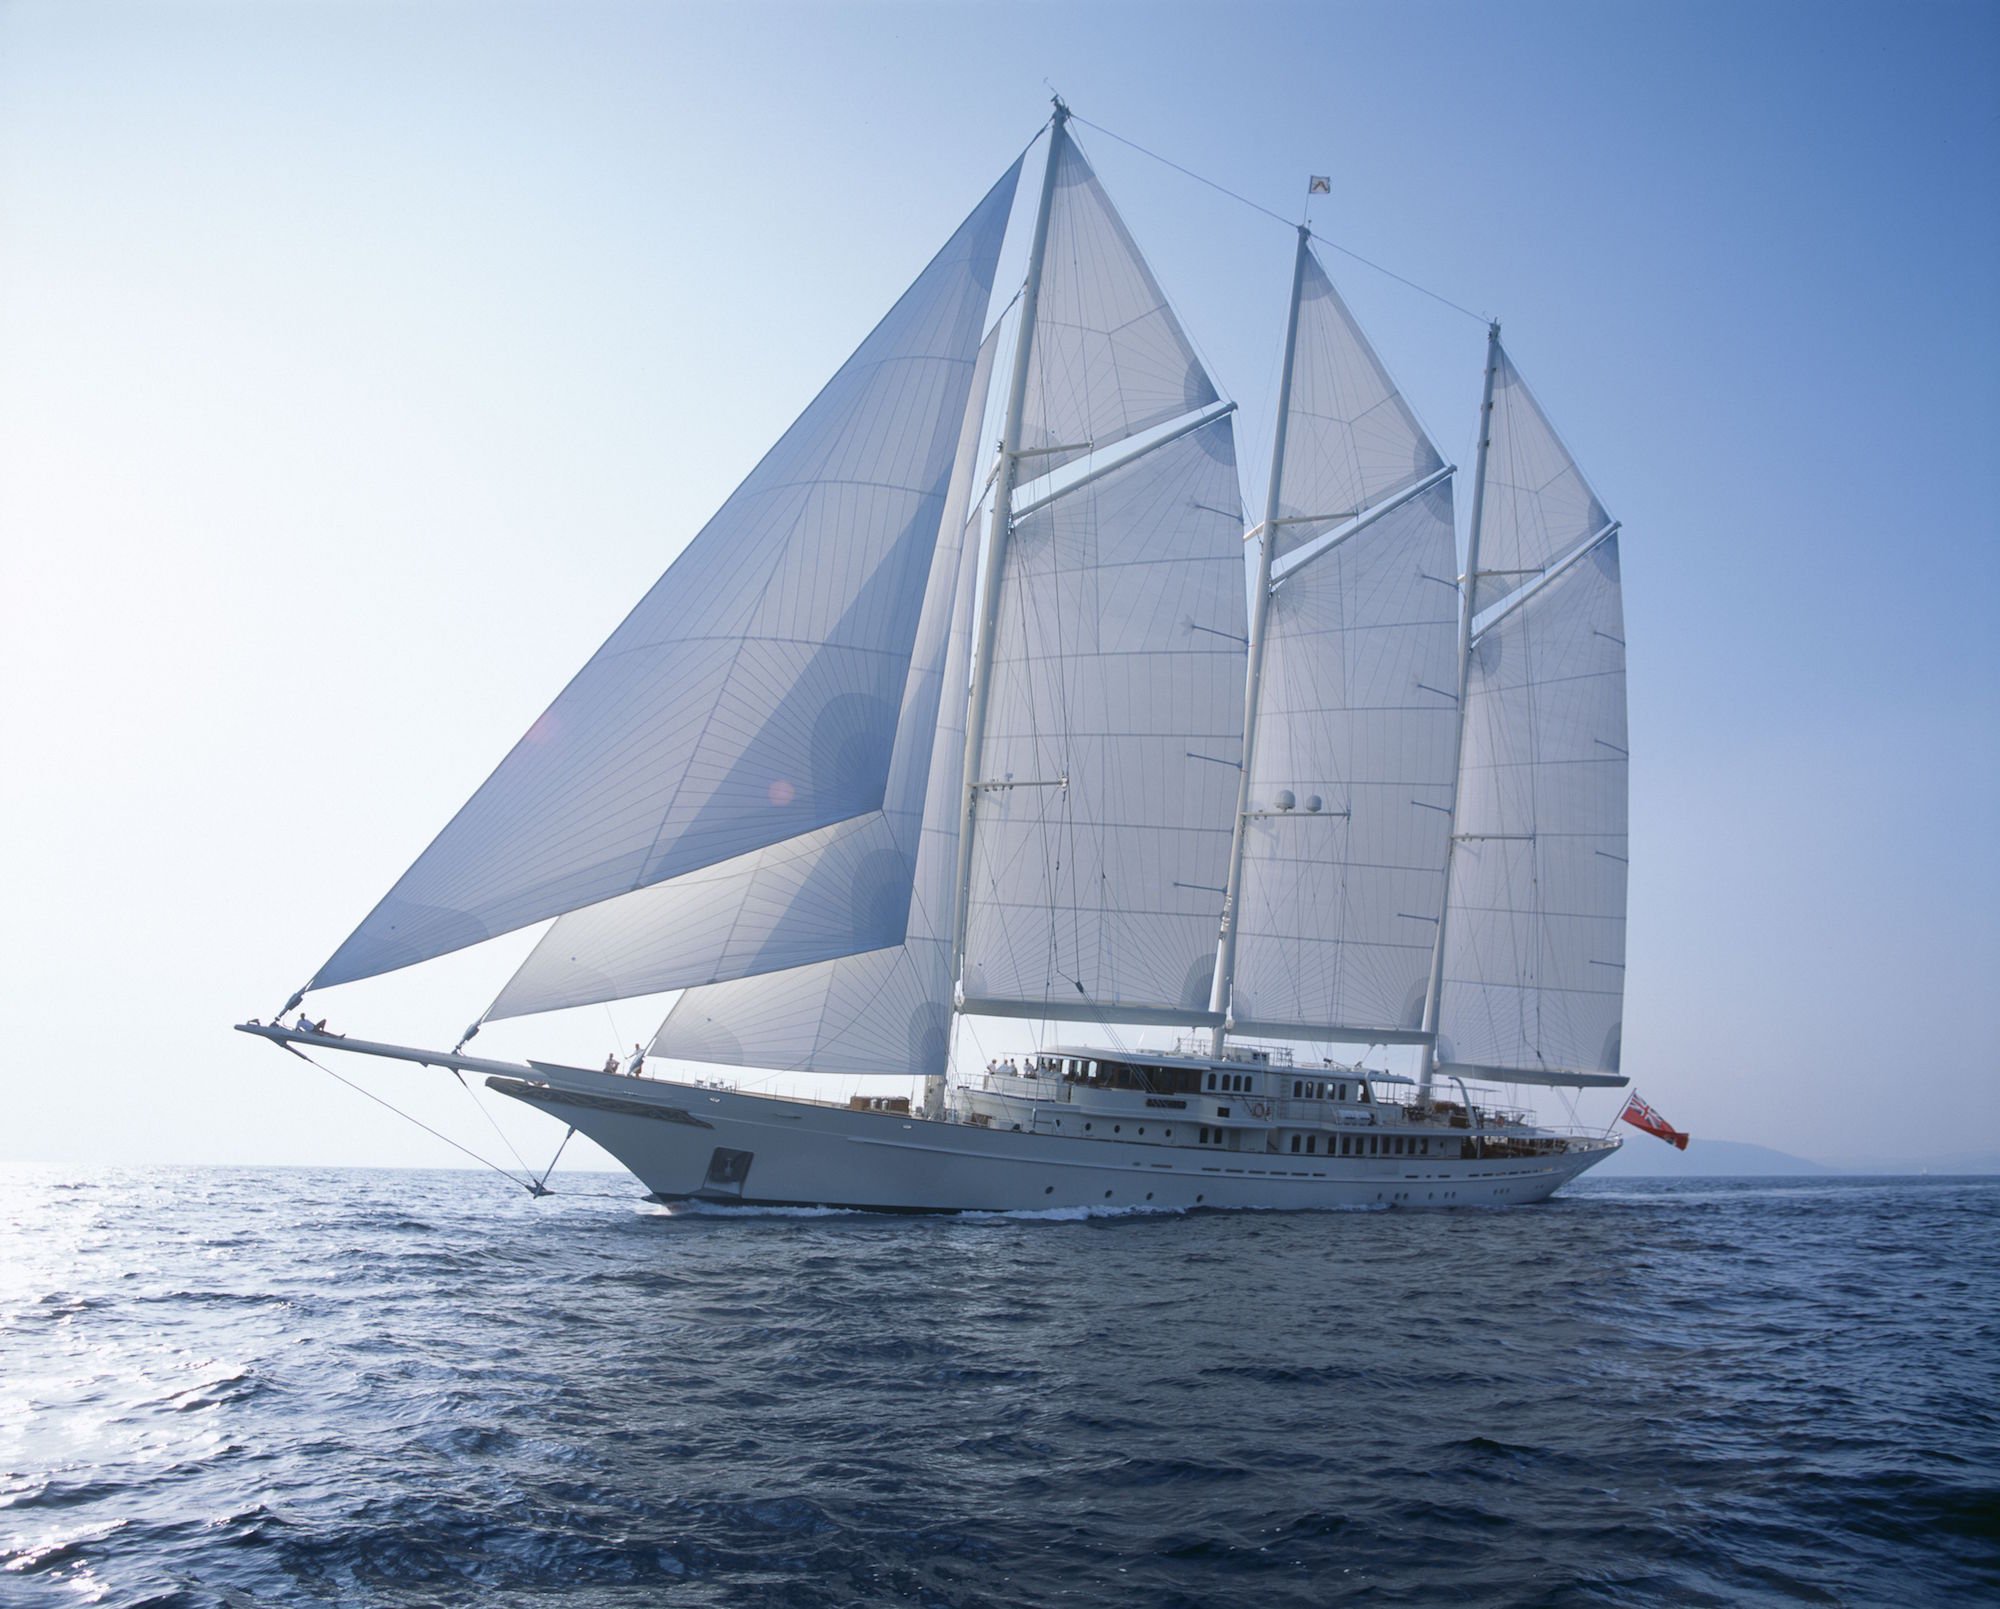 Athena is largest sailing yacht: PHOTOS, FEATURES - Business Insider